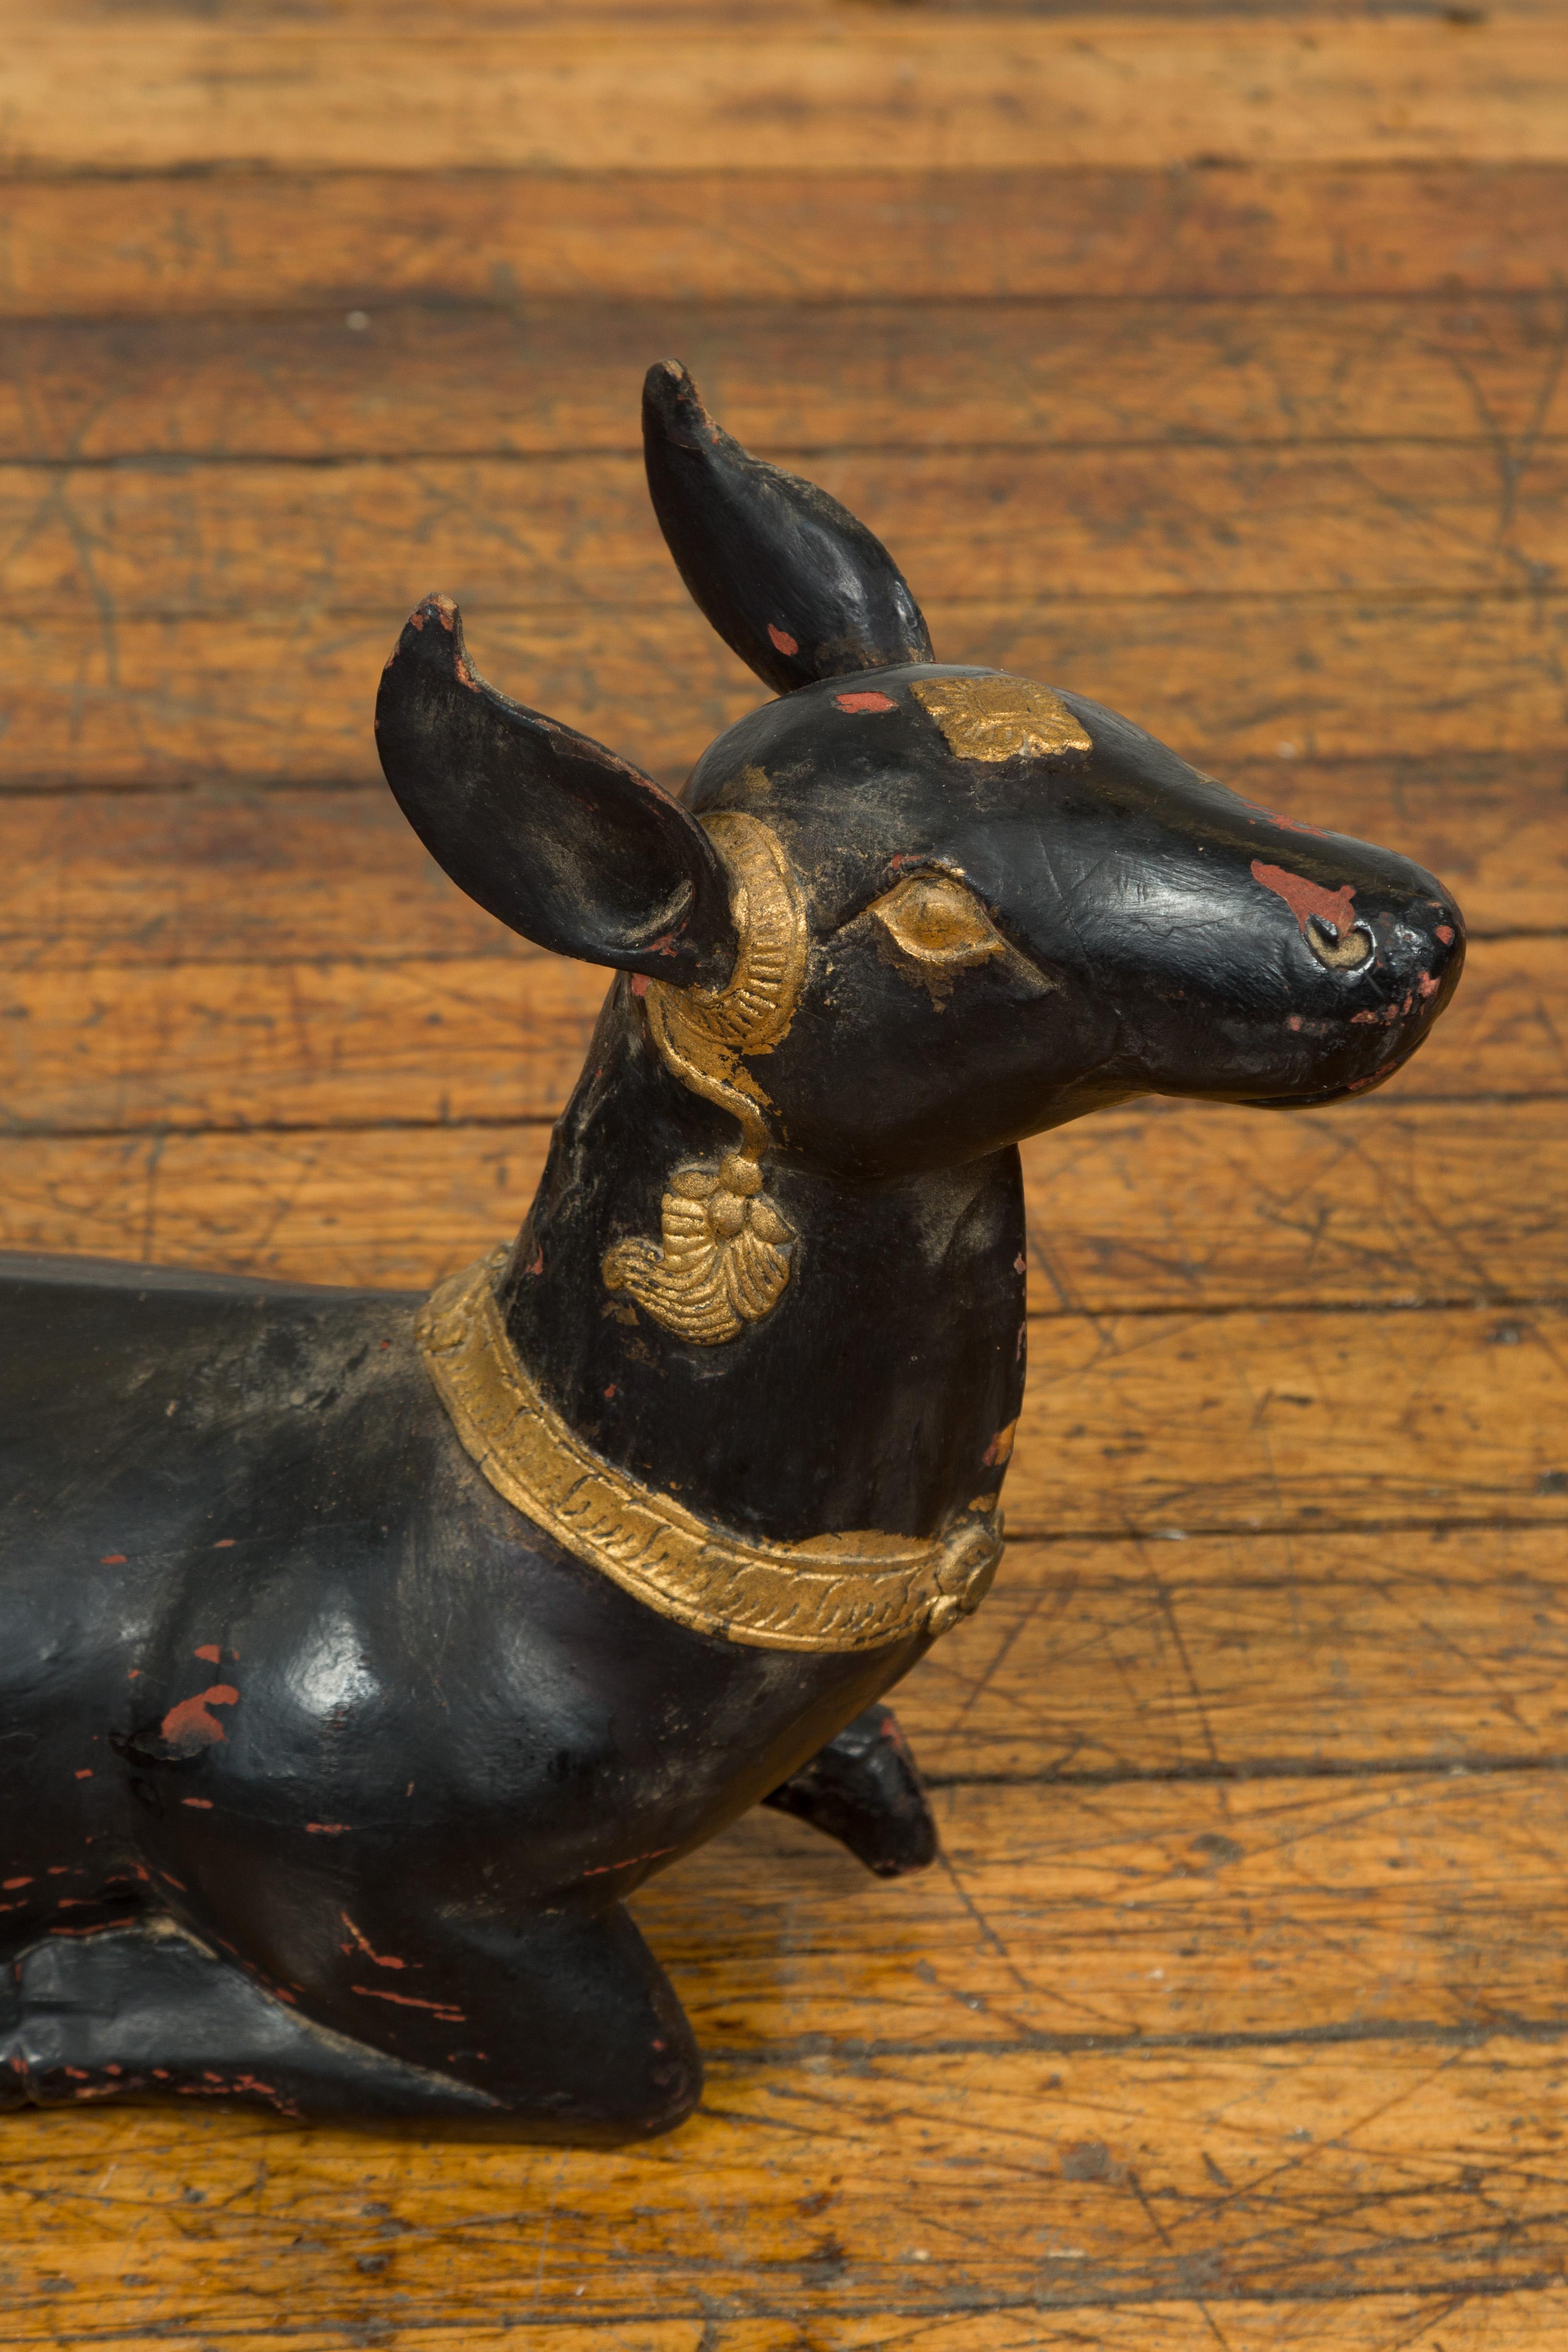 20th Century Vintage Thai Black Lacquered Goat Sculpture with Ornate Gilt Jewelry Motifs